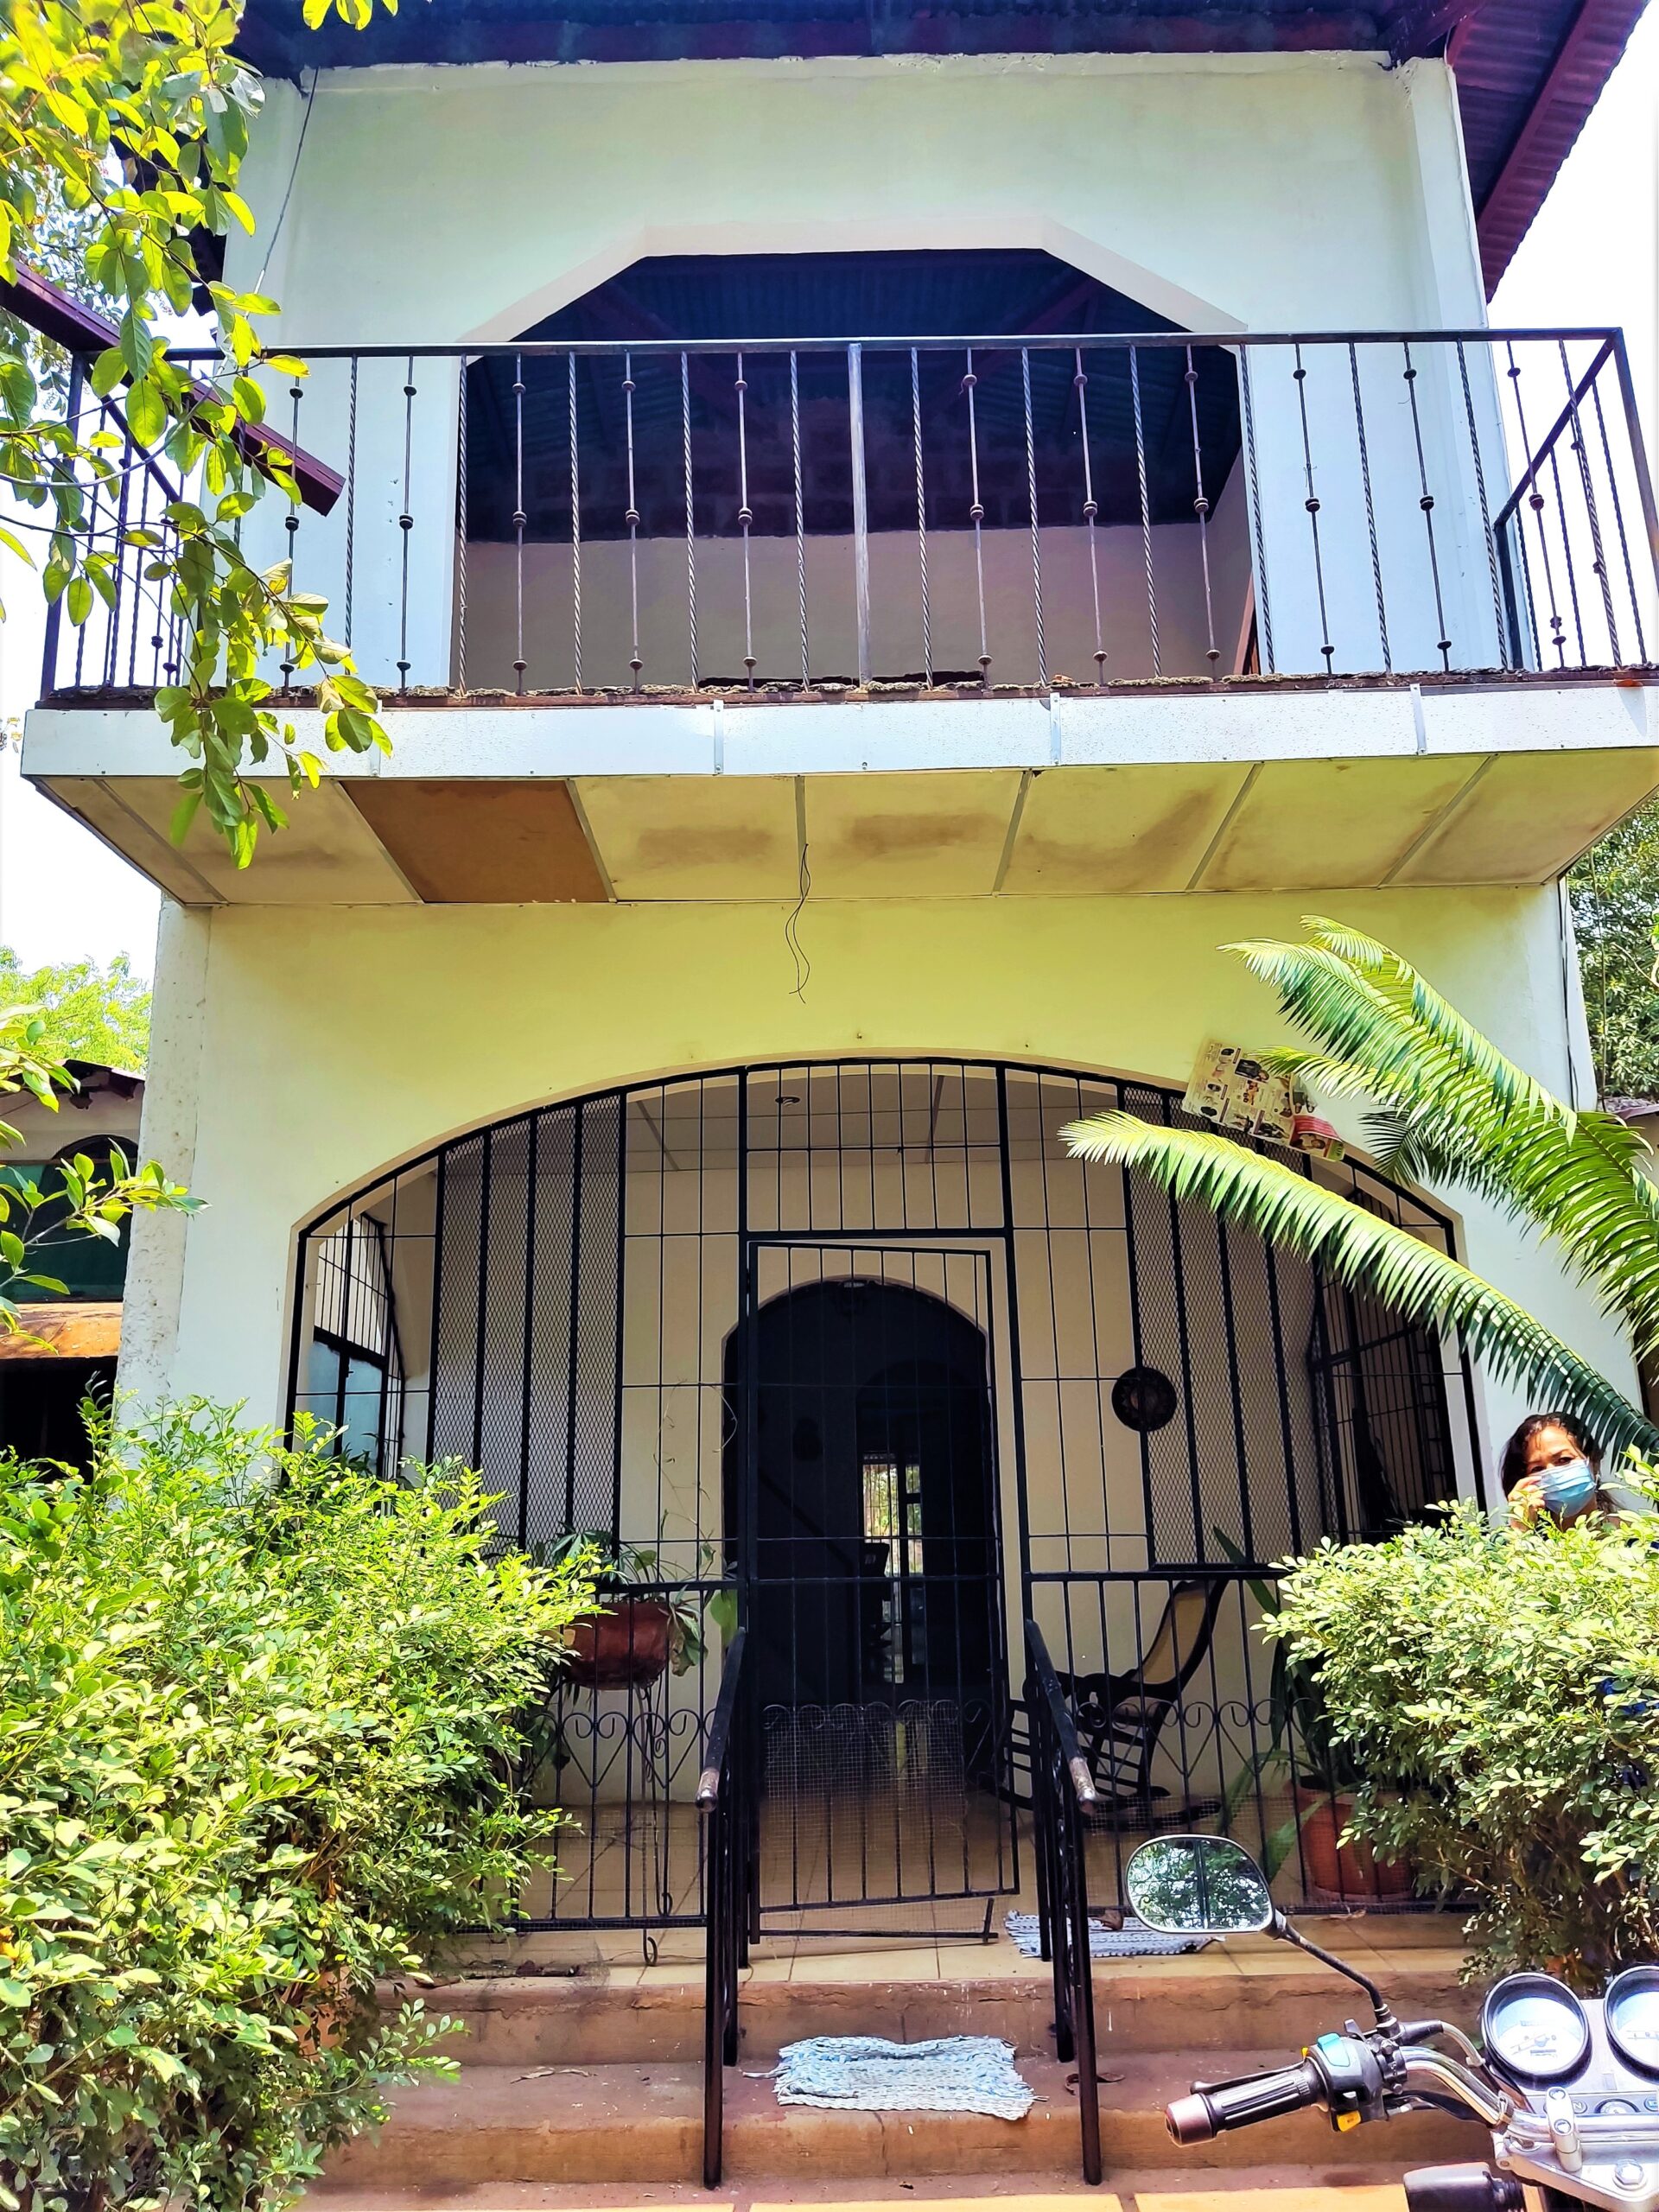 2 Story Home in Leon Nicaragua